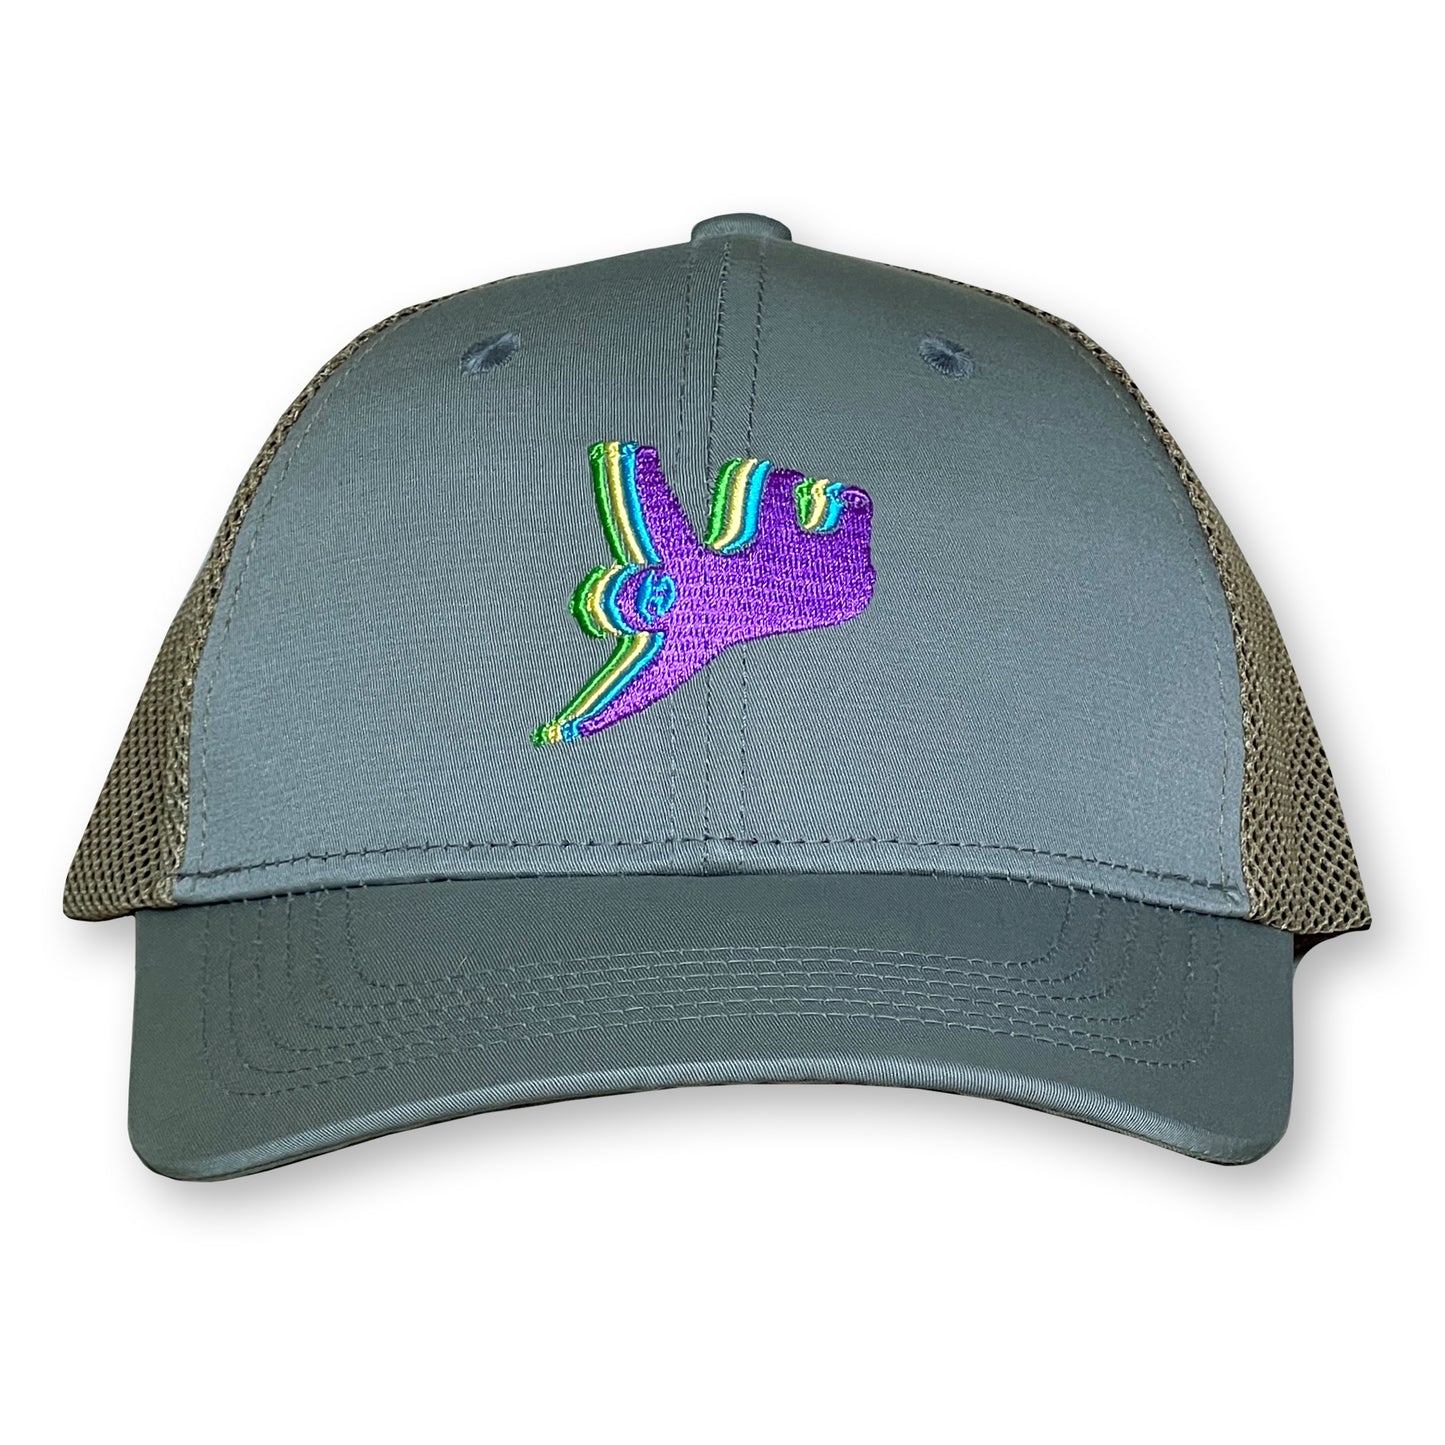 Sloth Trucker Hat / Mist Polycotton Blend with Oat Mesh and Crocus Sloth